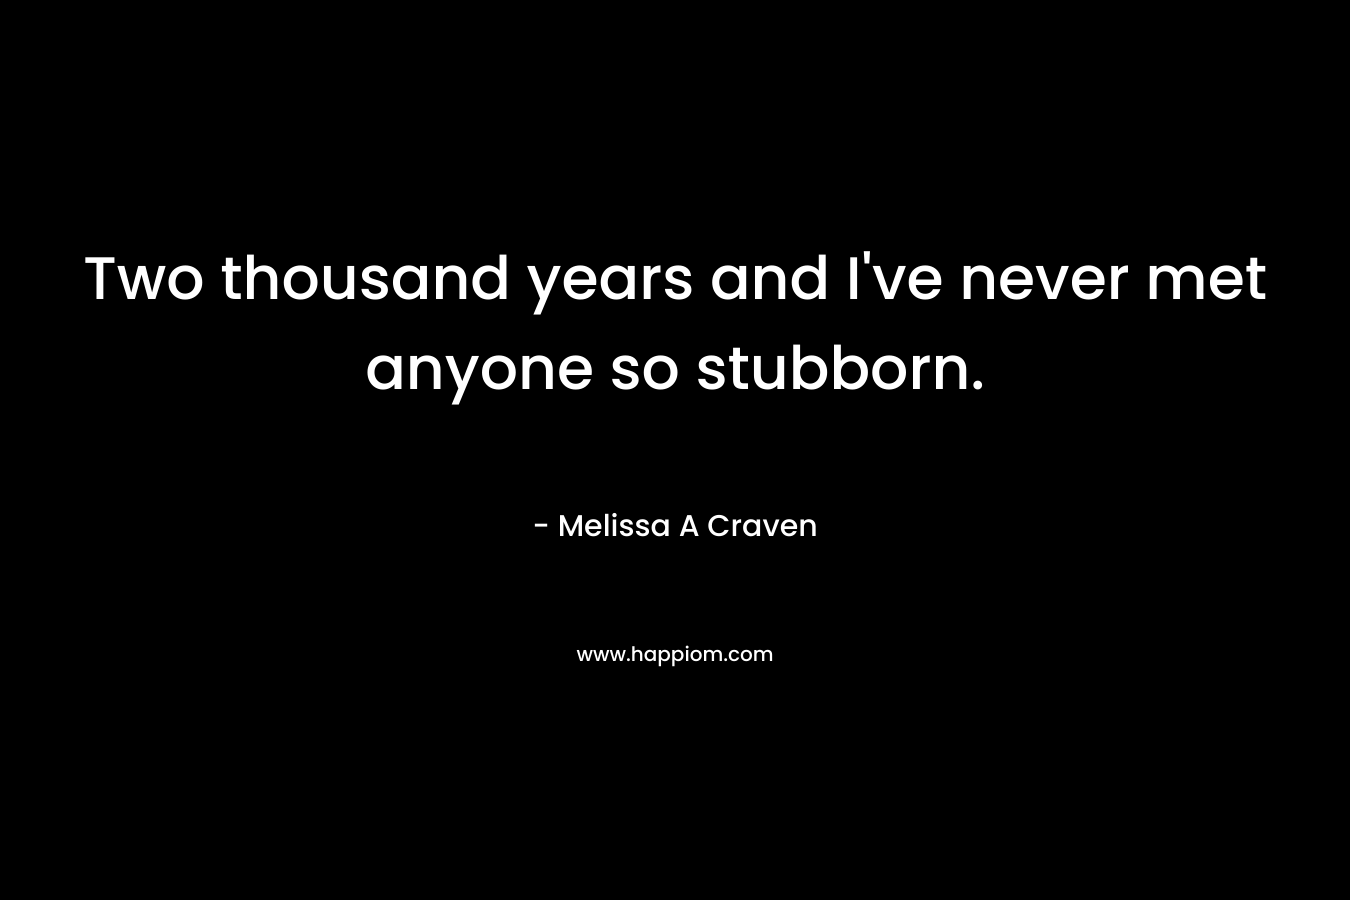 Two thousand years and I’ve never met anyone so stubborn. – Melissa A Craven